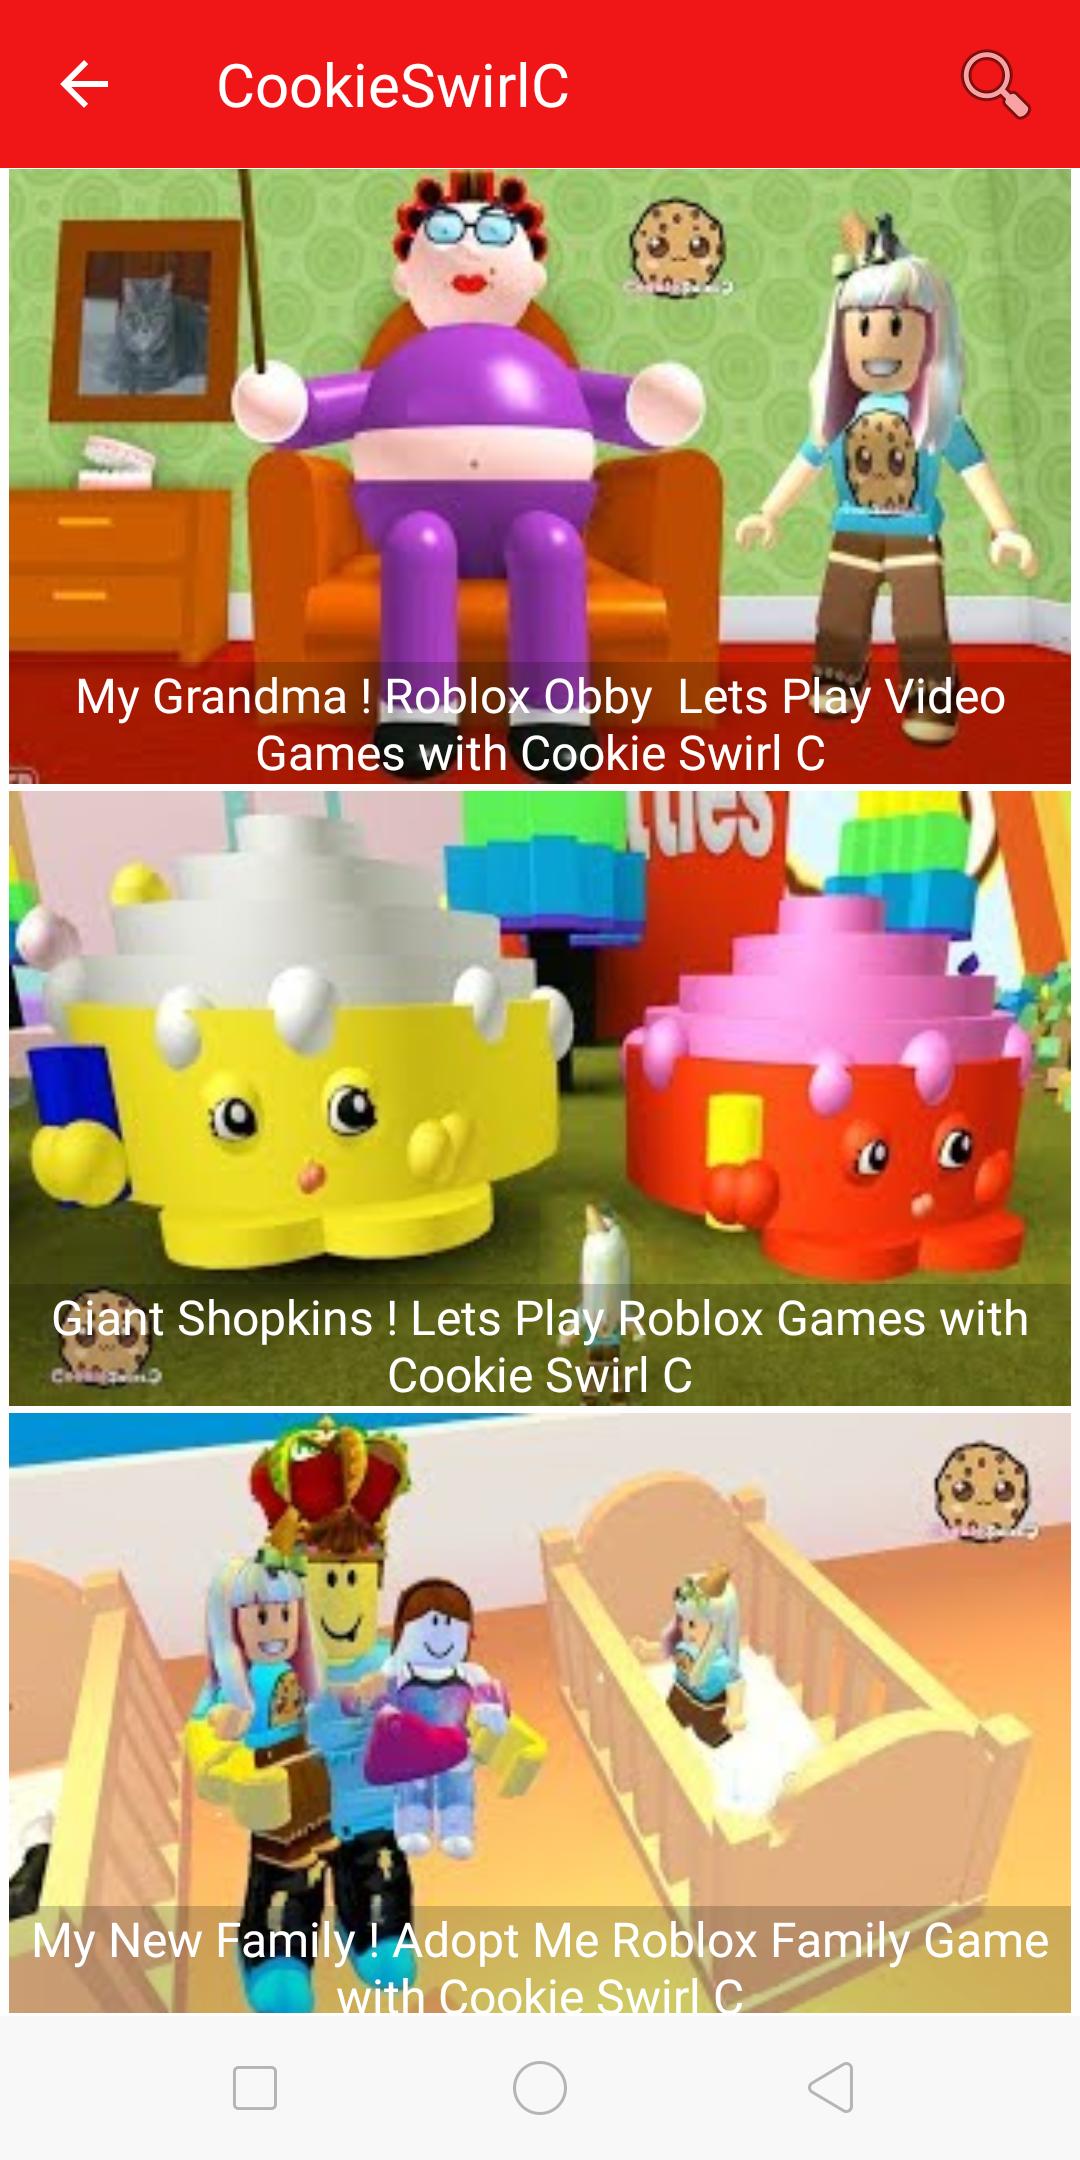 Crazy Cookie World Swirl Videos For Android Apk Download - cookie swirl c roblox videos